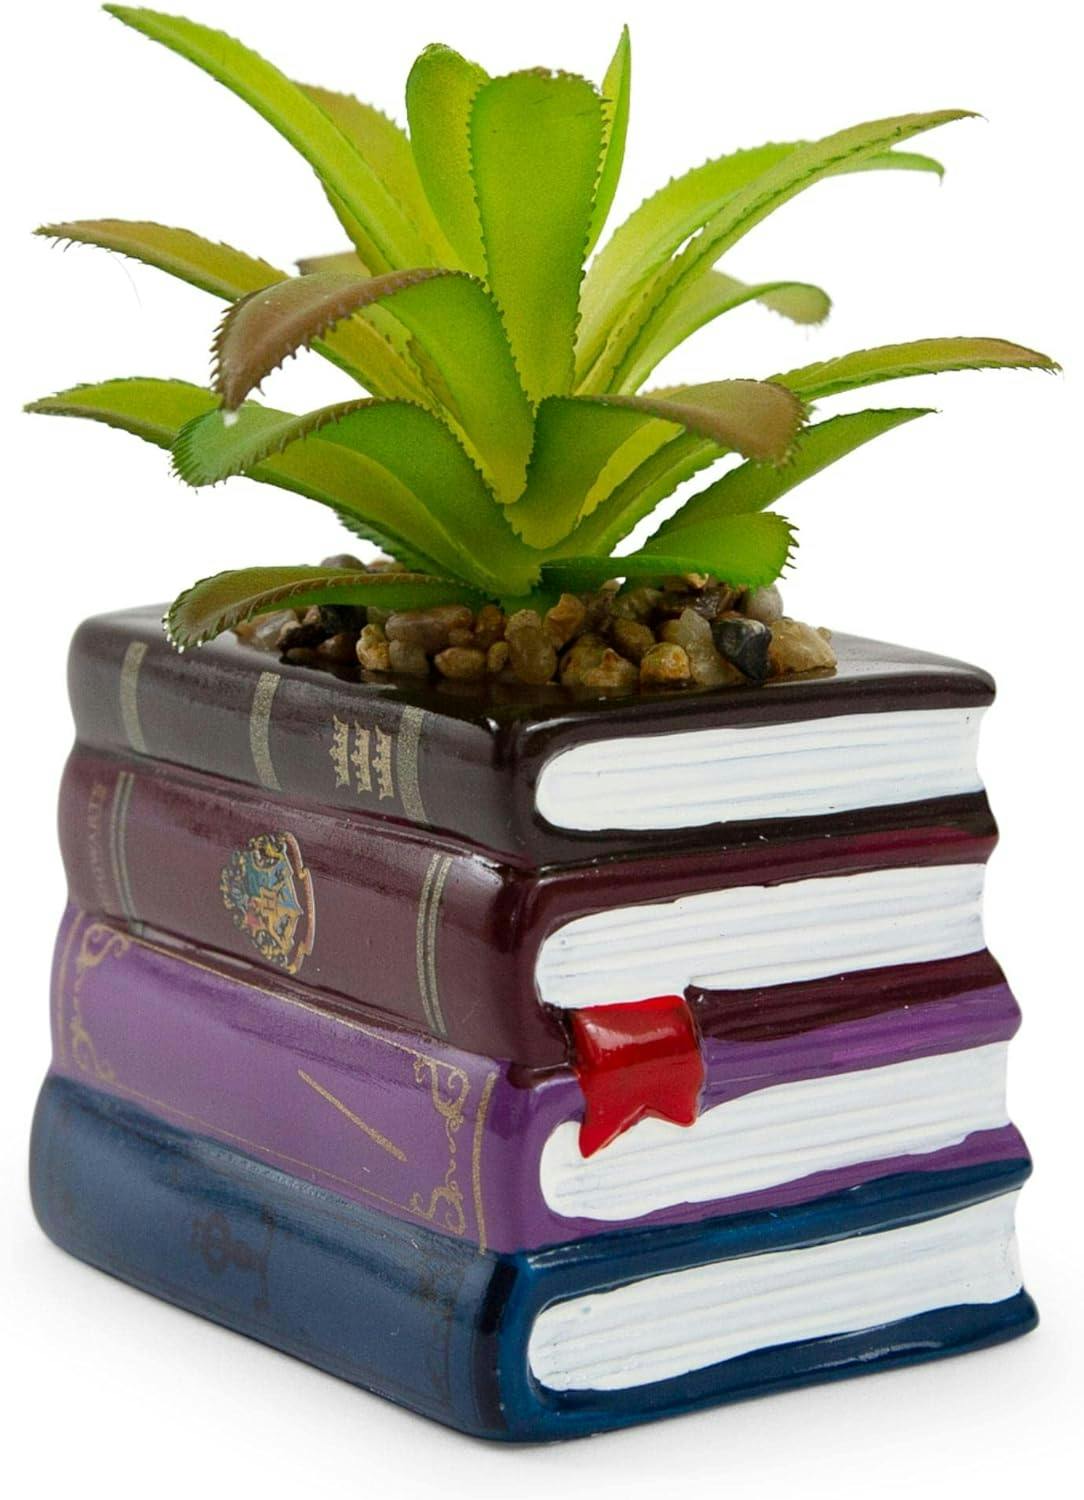 Enchanted Hogwarts Book Stack 3" Ceramic Planter with Faux Succulent